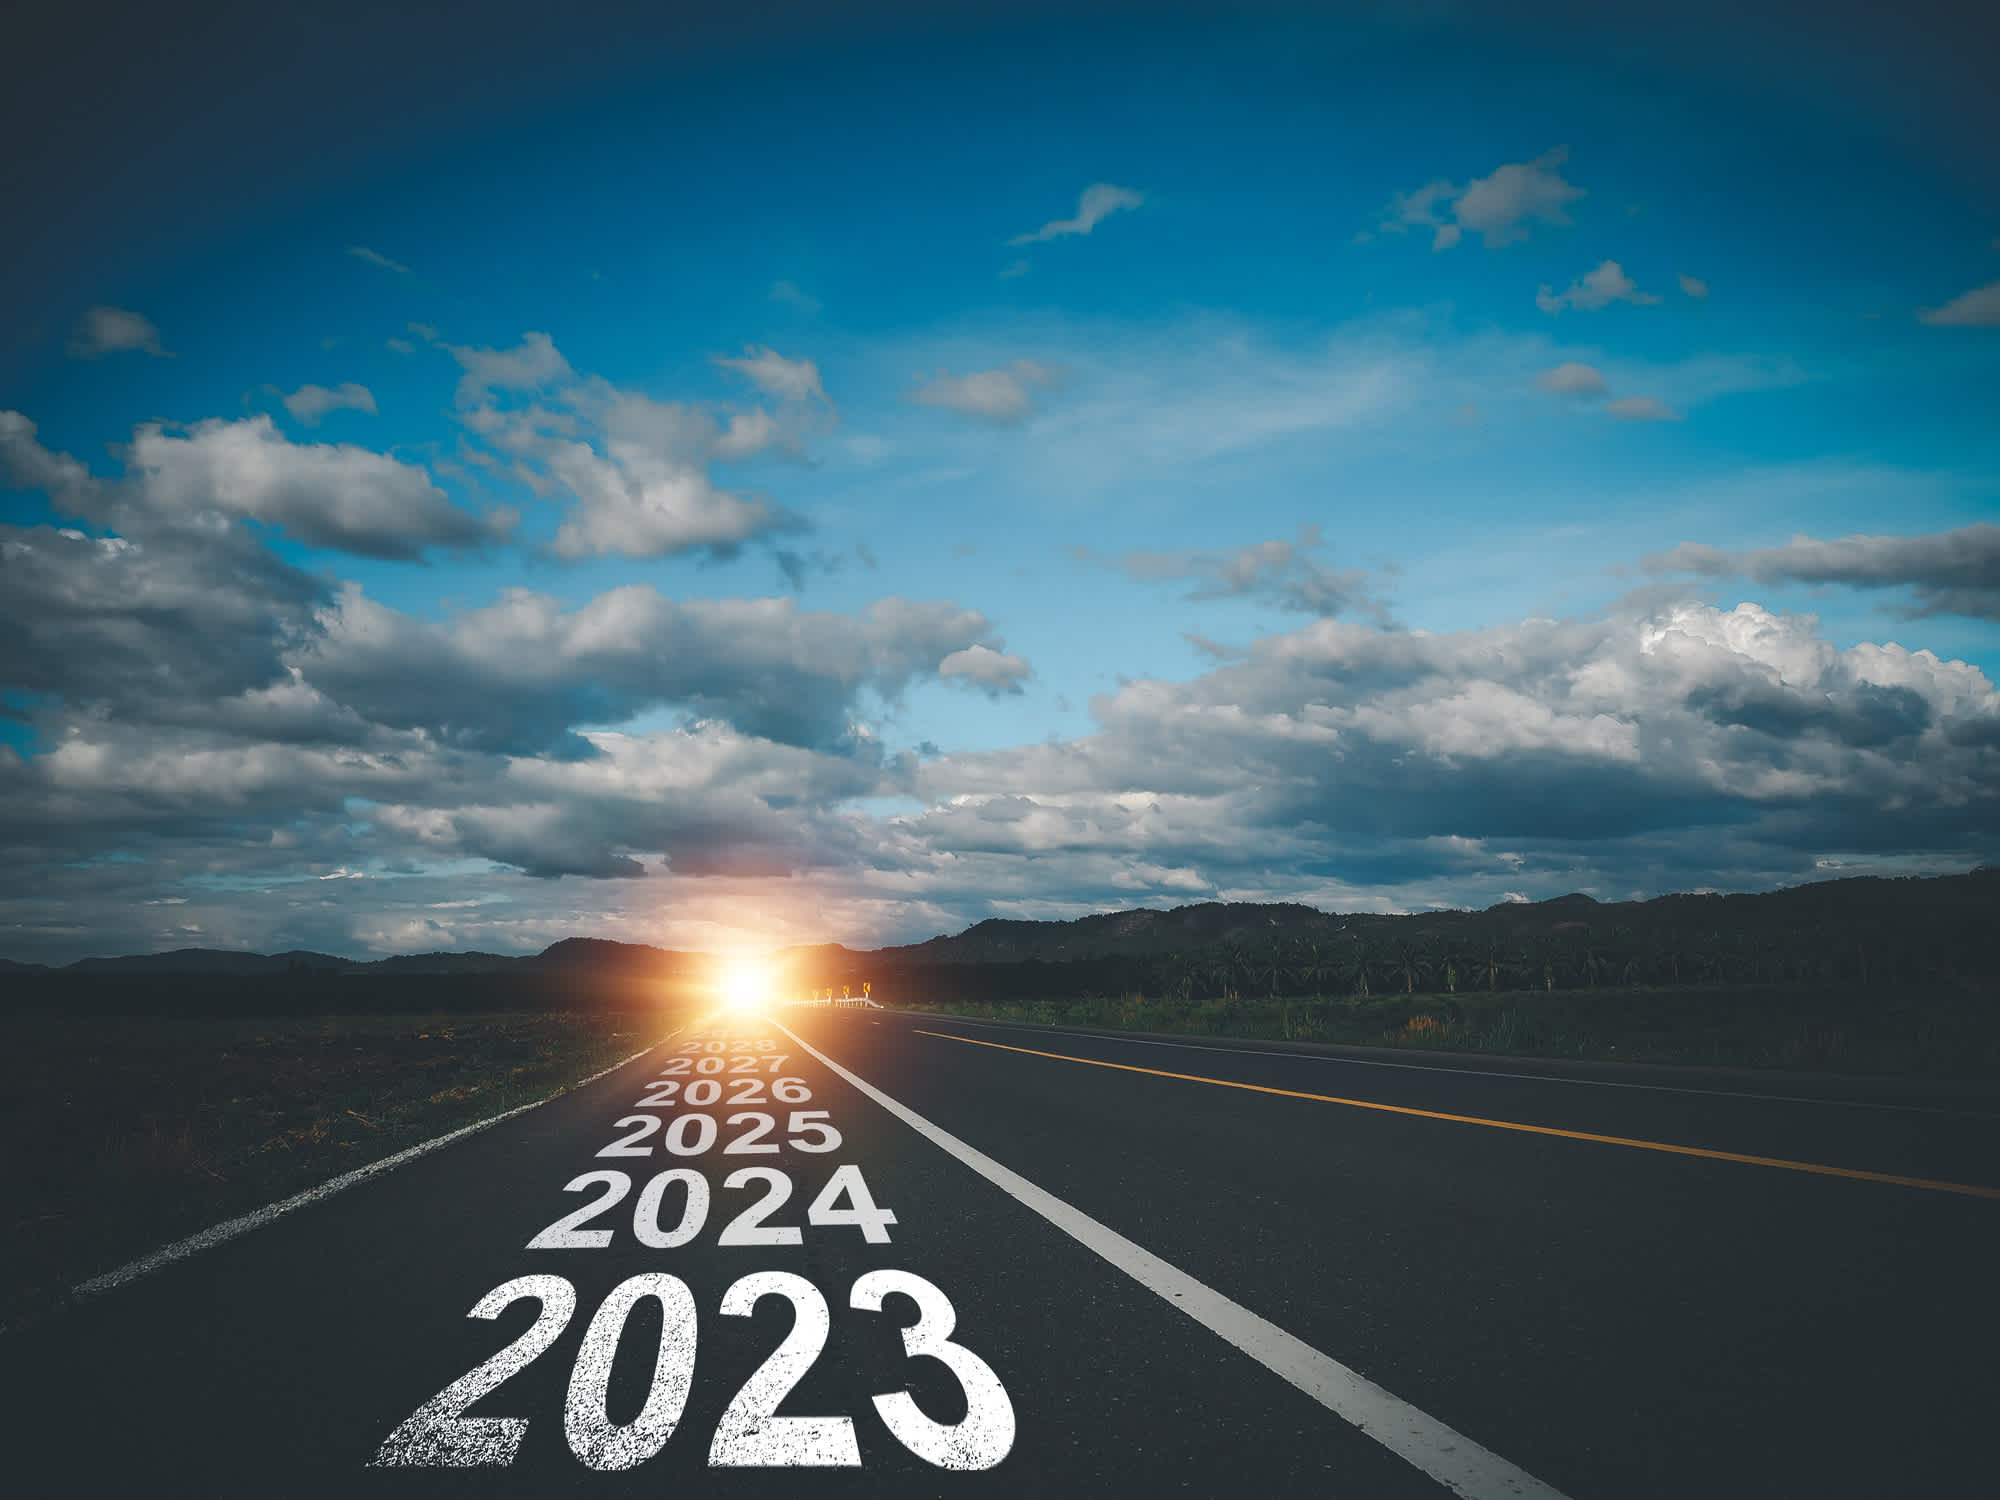 The beginning of the year 2023 that continues to line up the year of the future.